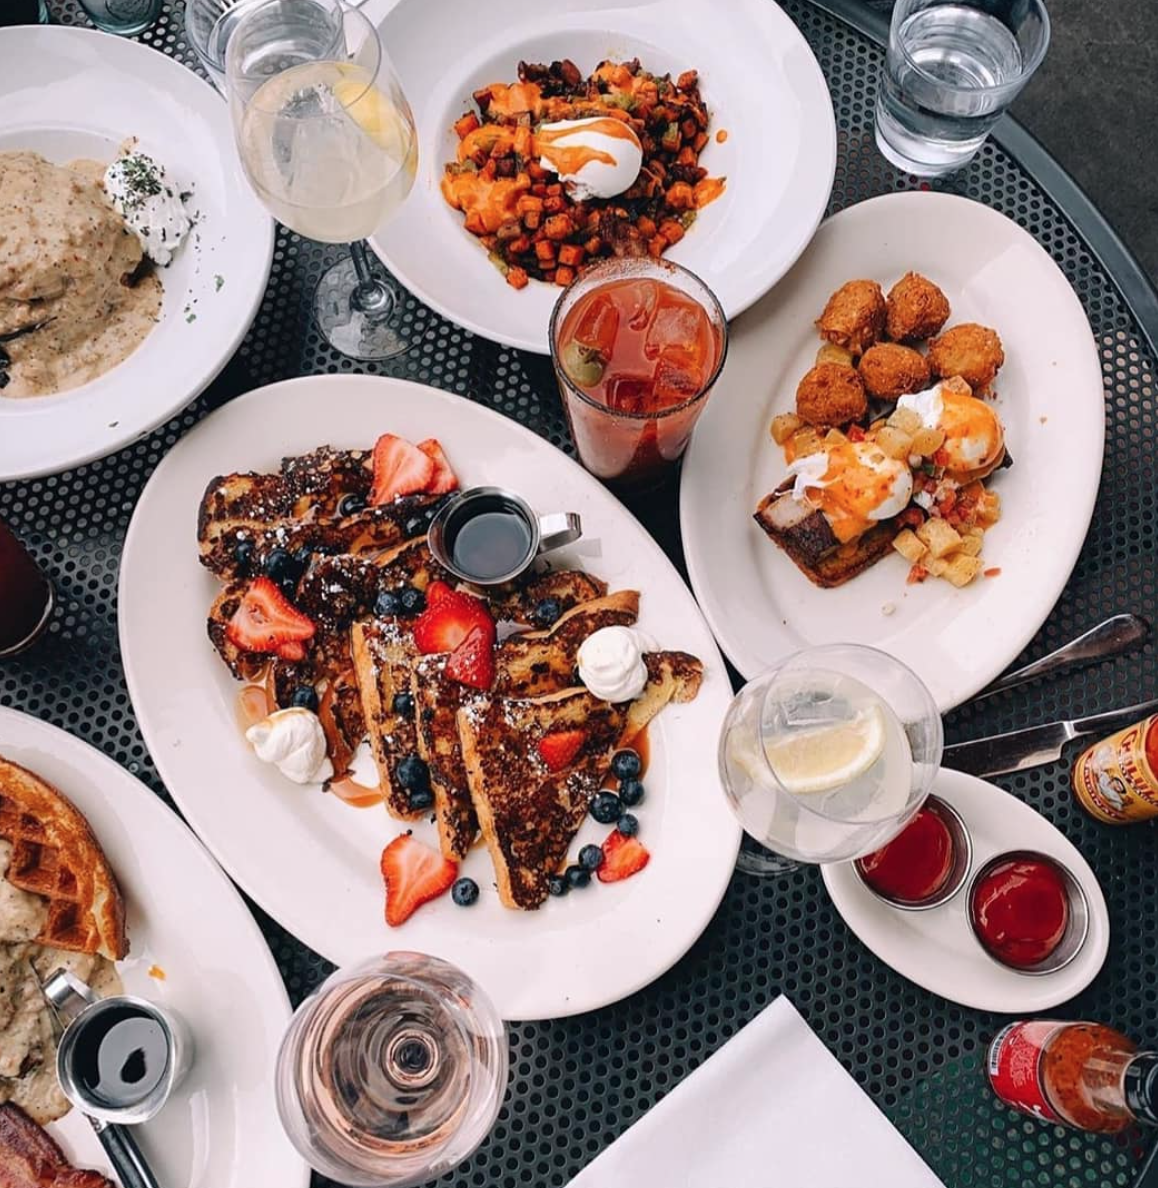 All the brunch things at Bacon Social House in Denver, Colorado